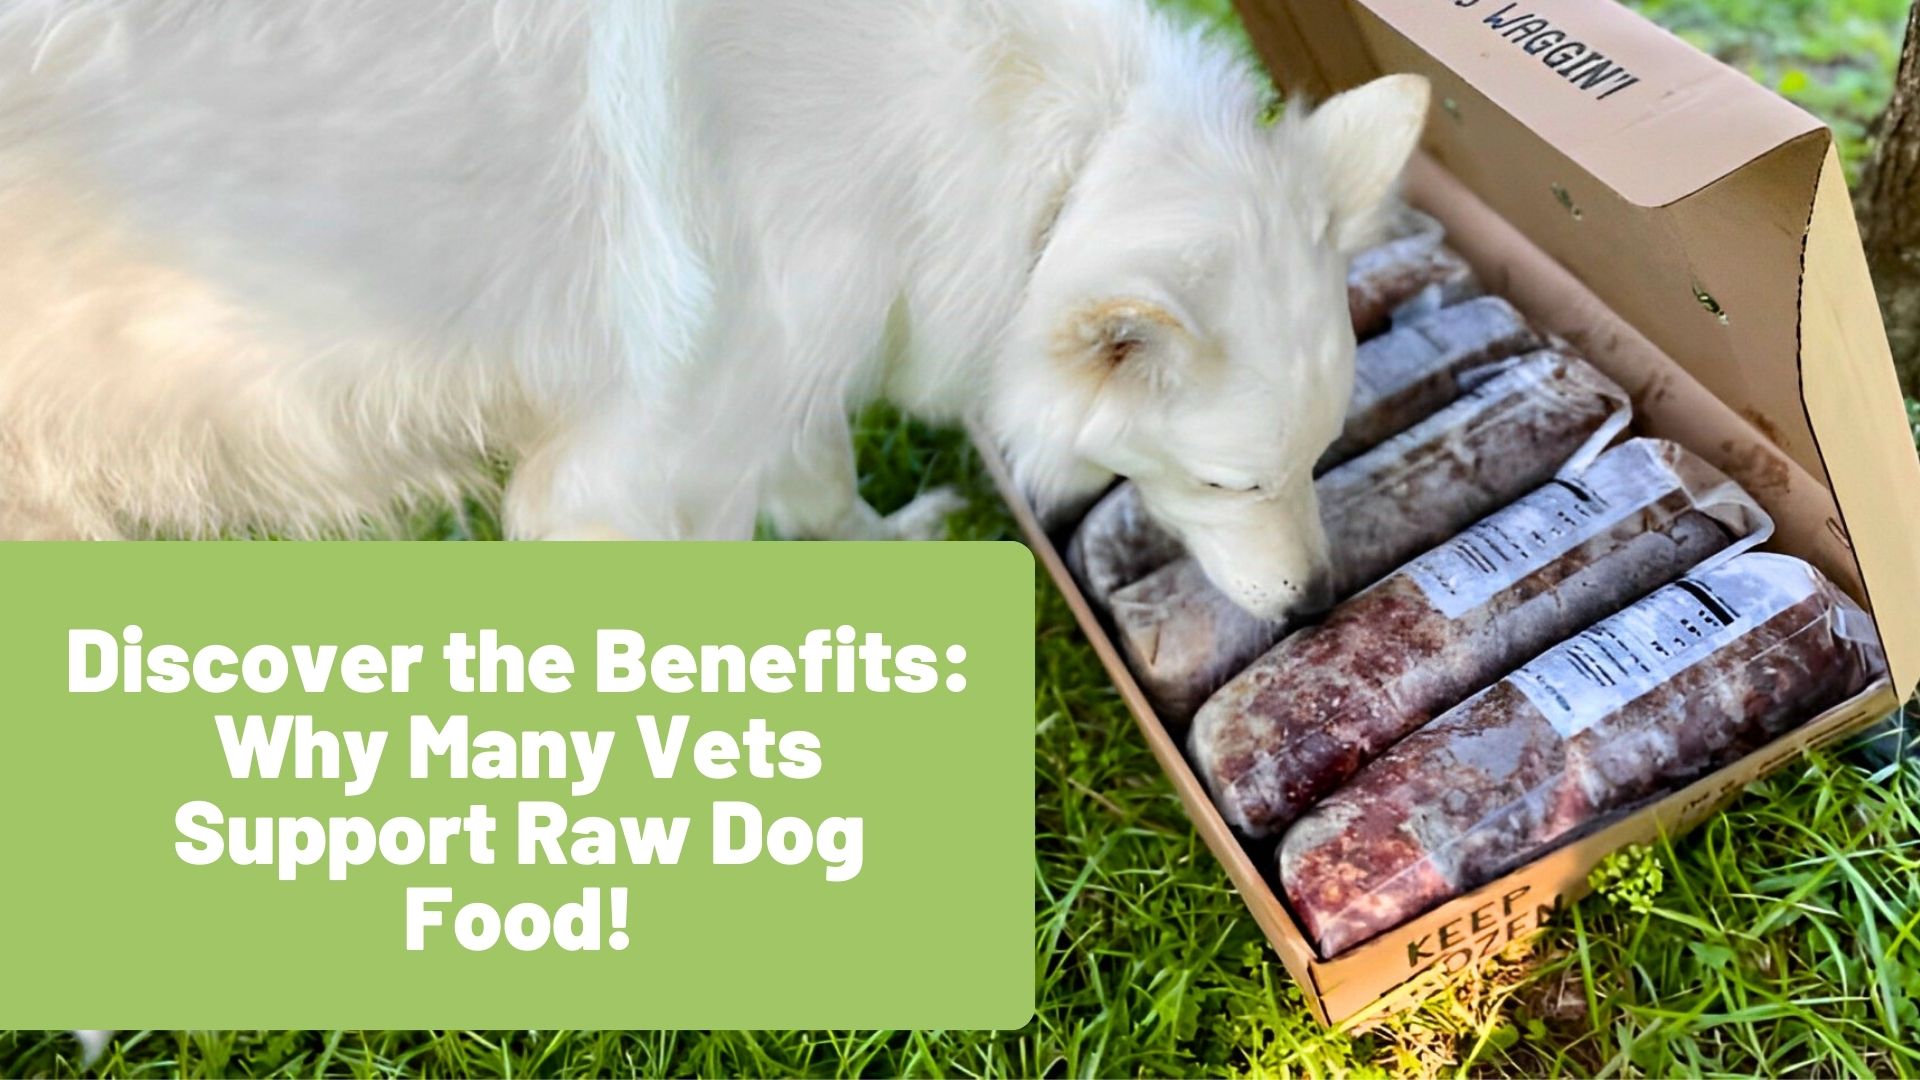 Discover the Benefits: Why Many Vets Support Raw Dog Food! - RawOrigins.pet - The Raw Dog Food Company